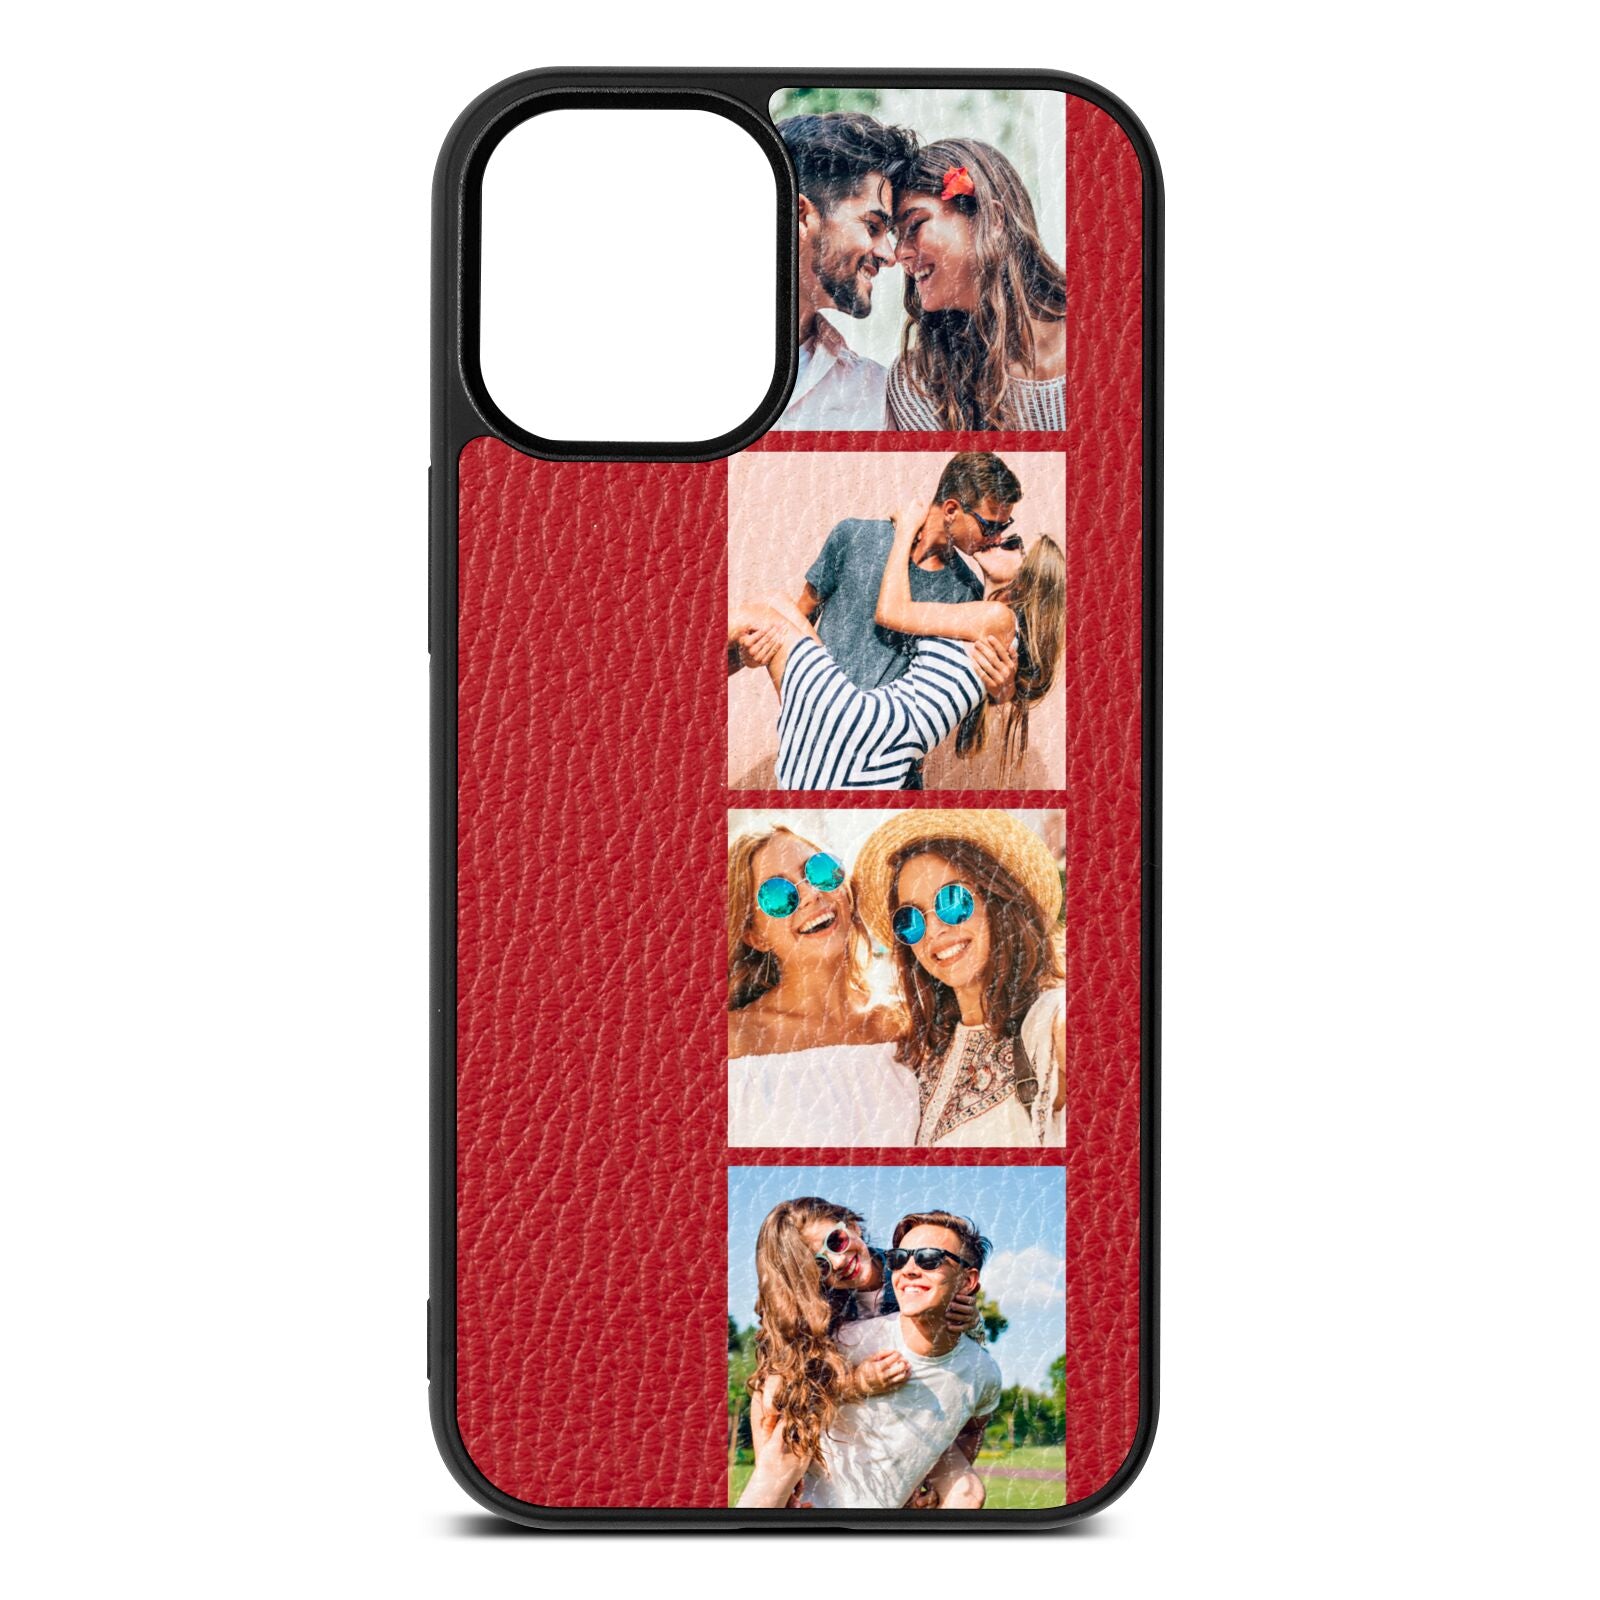 Photo Strip Montage Upload Red Pebble Leather iPhone 12 Mini Case